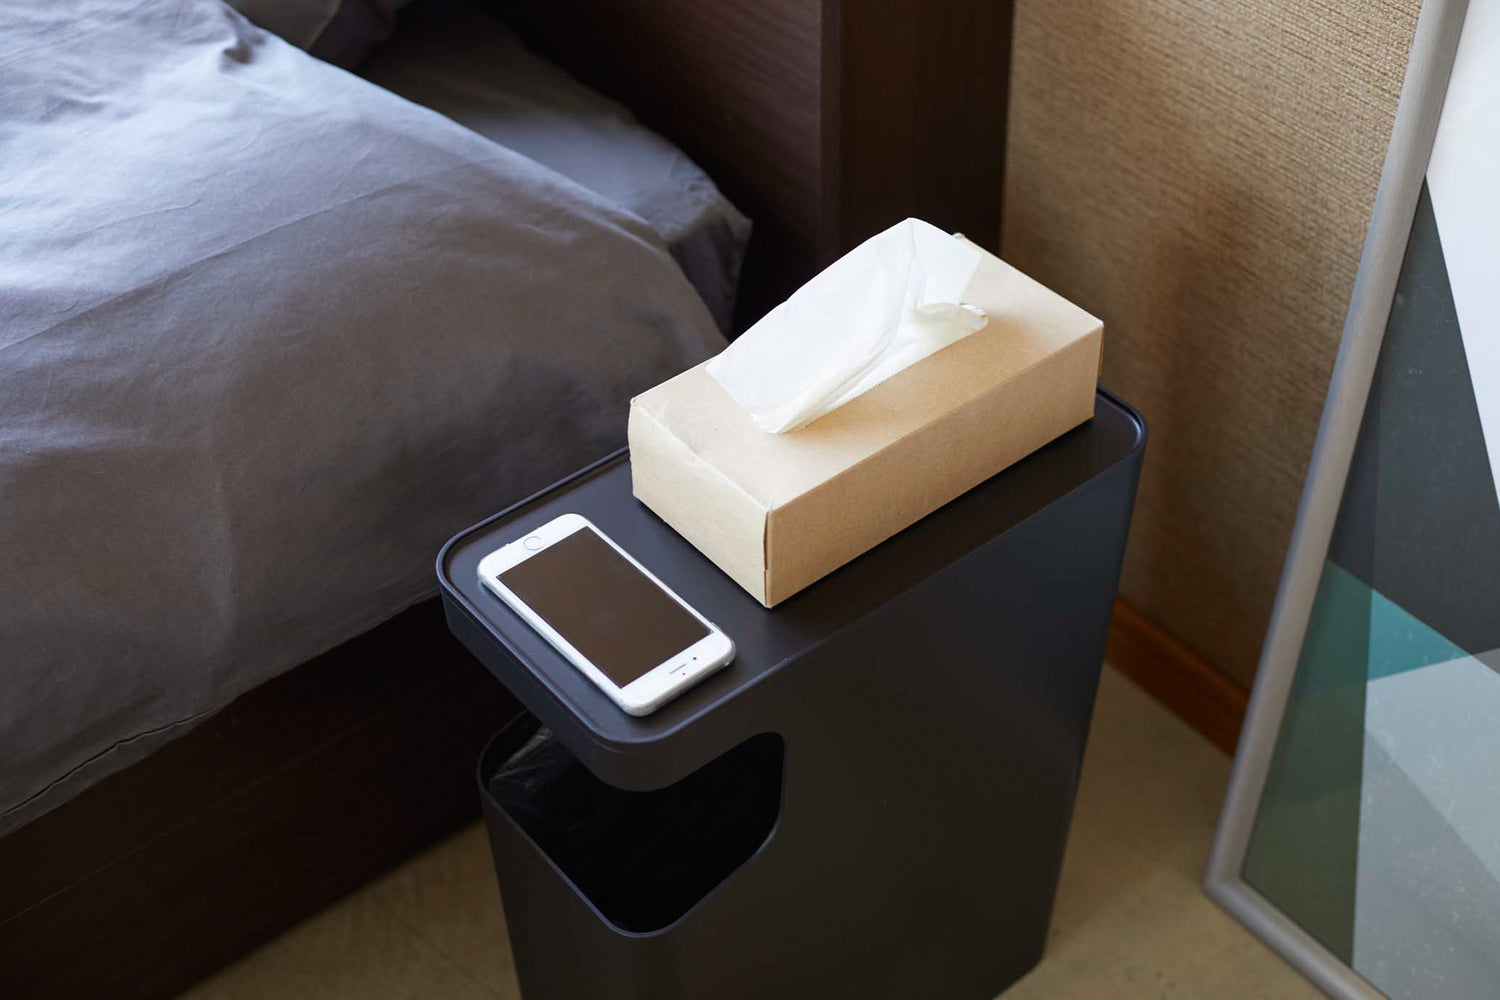 View 10 - Aerial view of black Side Table Trash Can displaying tissue box and phone in bedroom by Yamazaki Home.